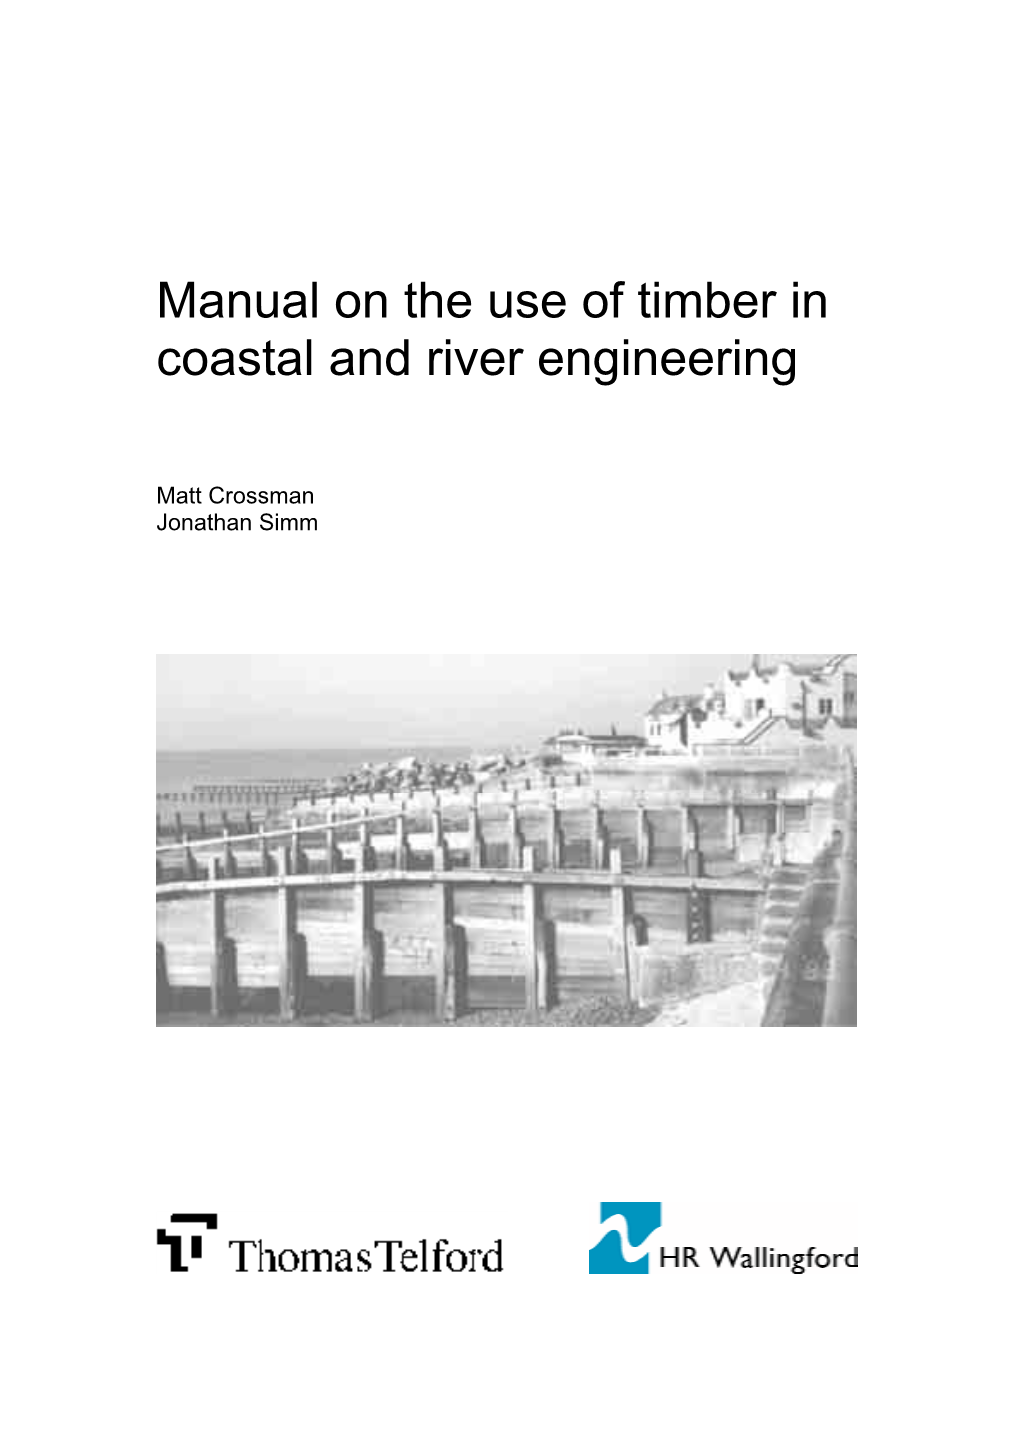 Manual on the Use of Timber in Coastal and River Engineering